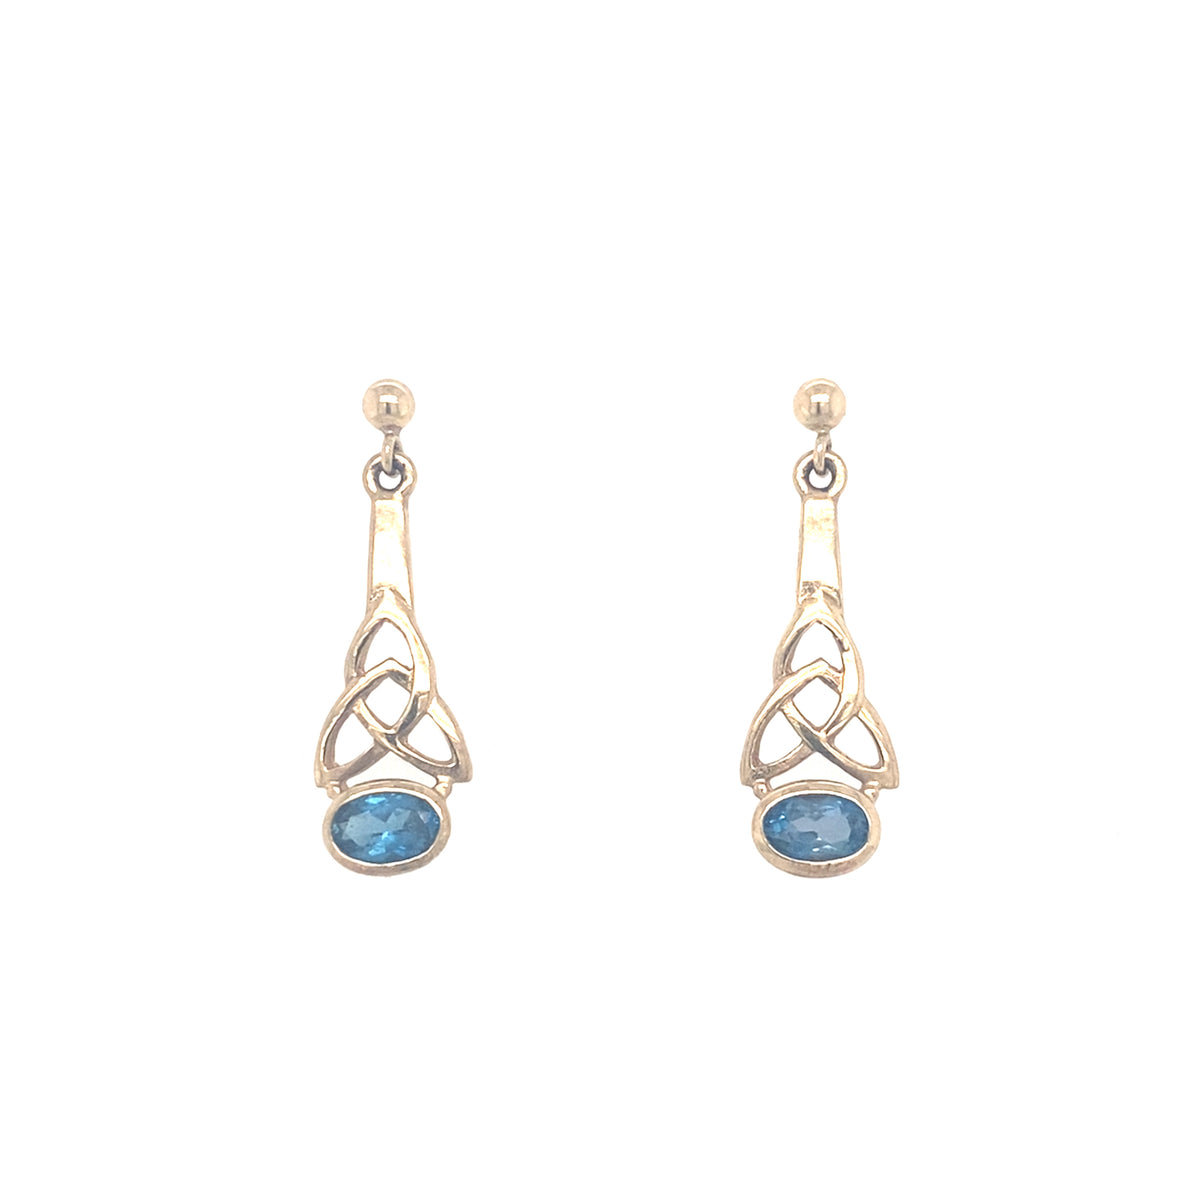 9kt Gold Drop Earrings with Aquamarine Stone